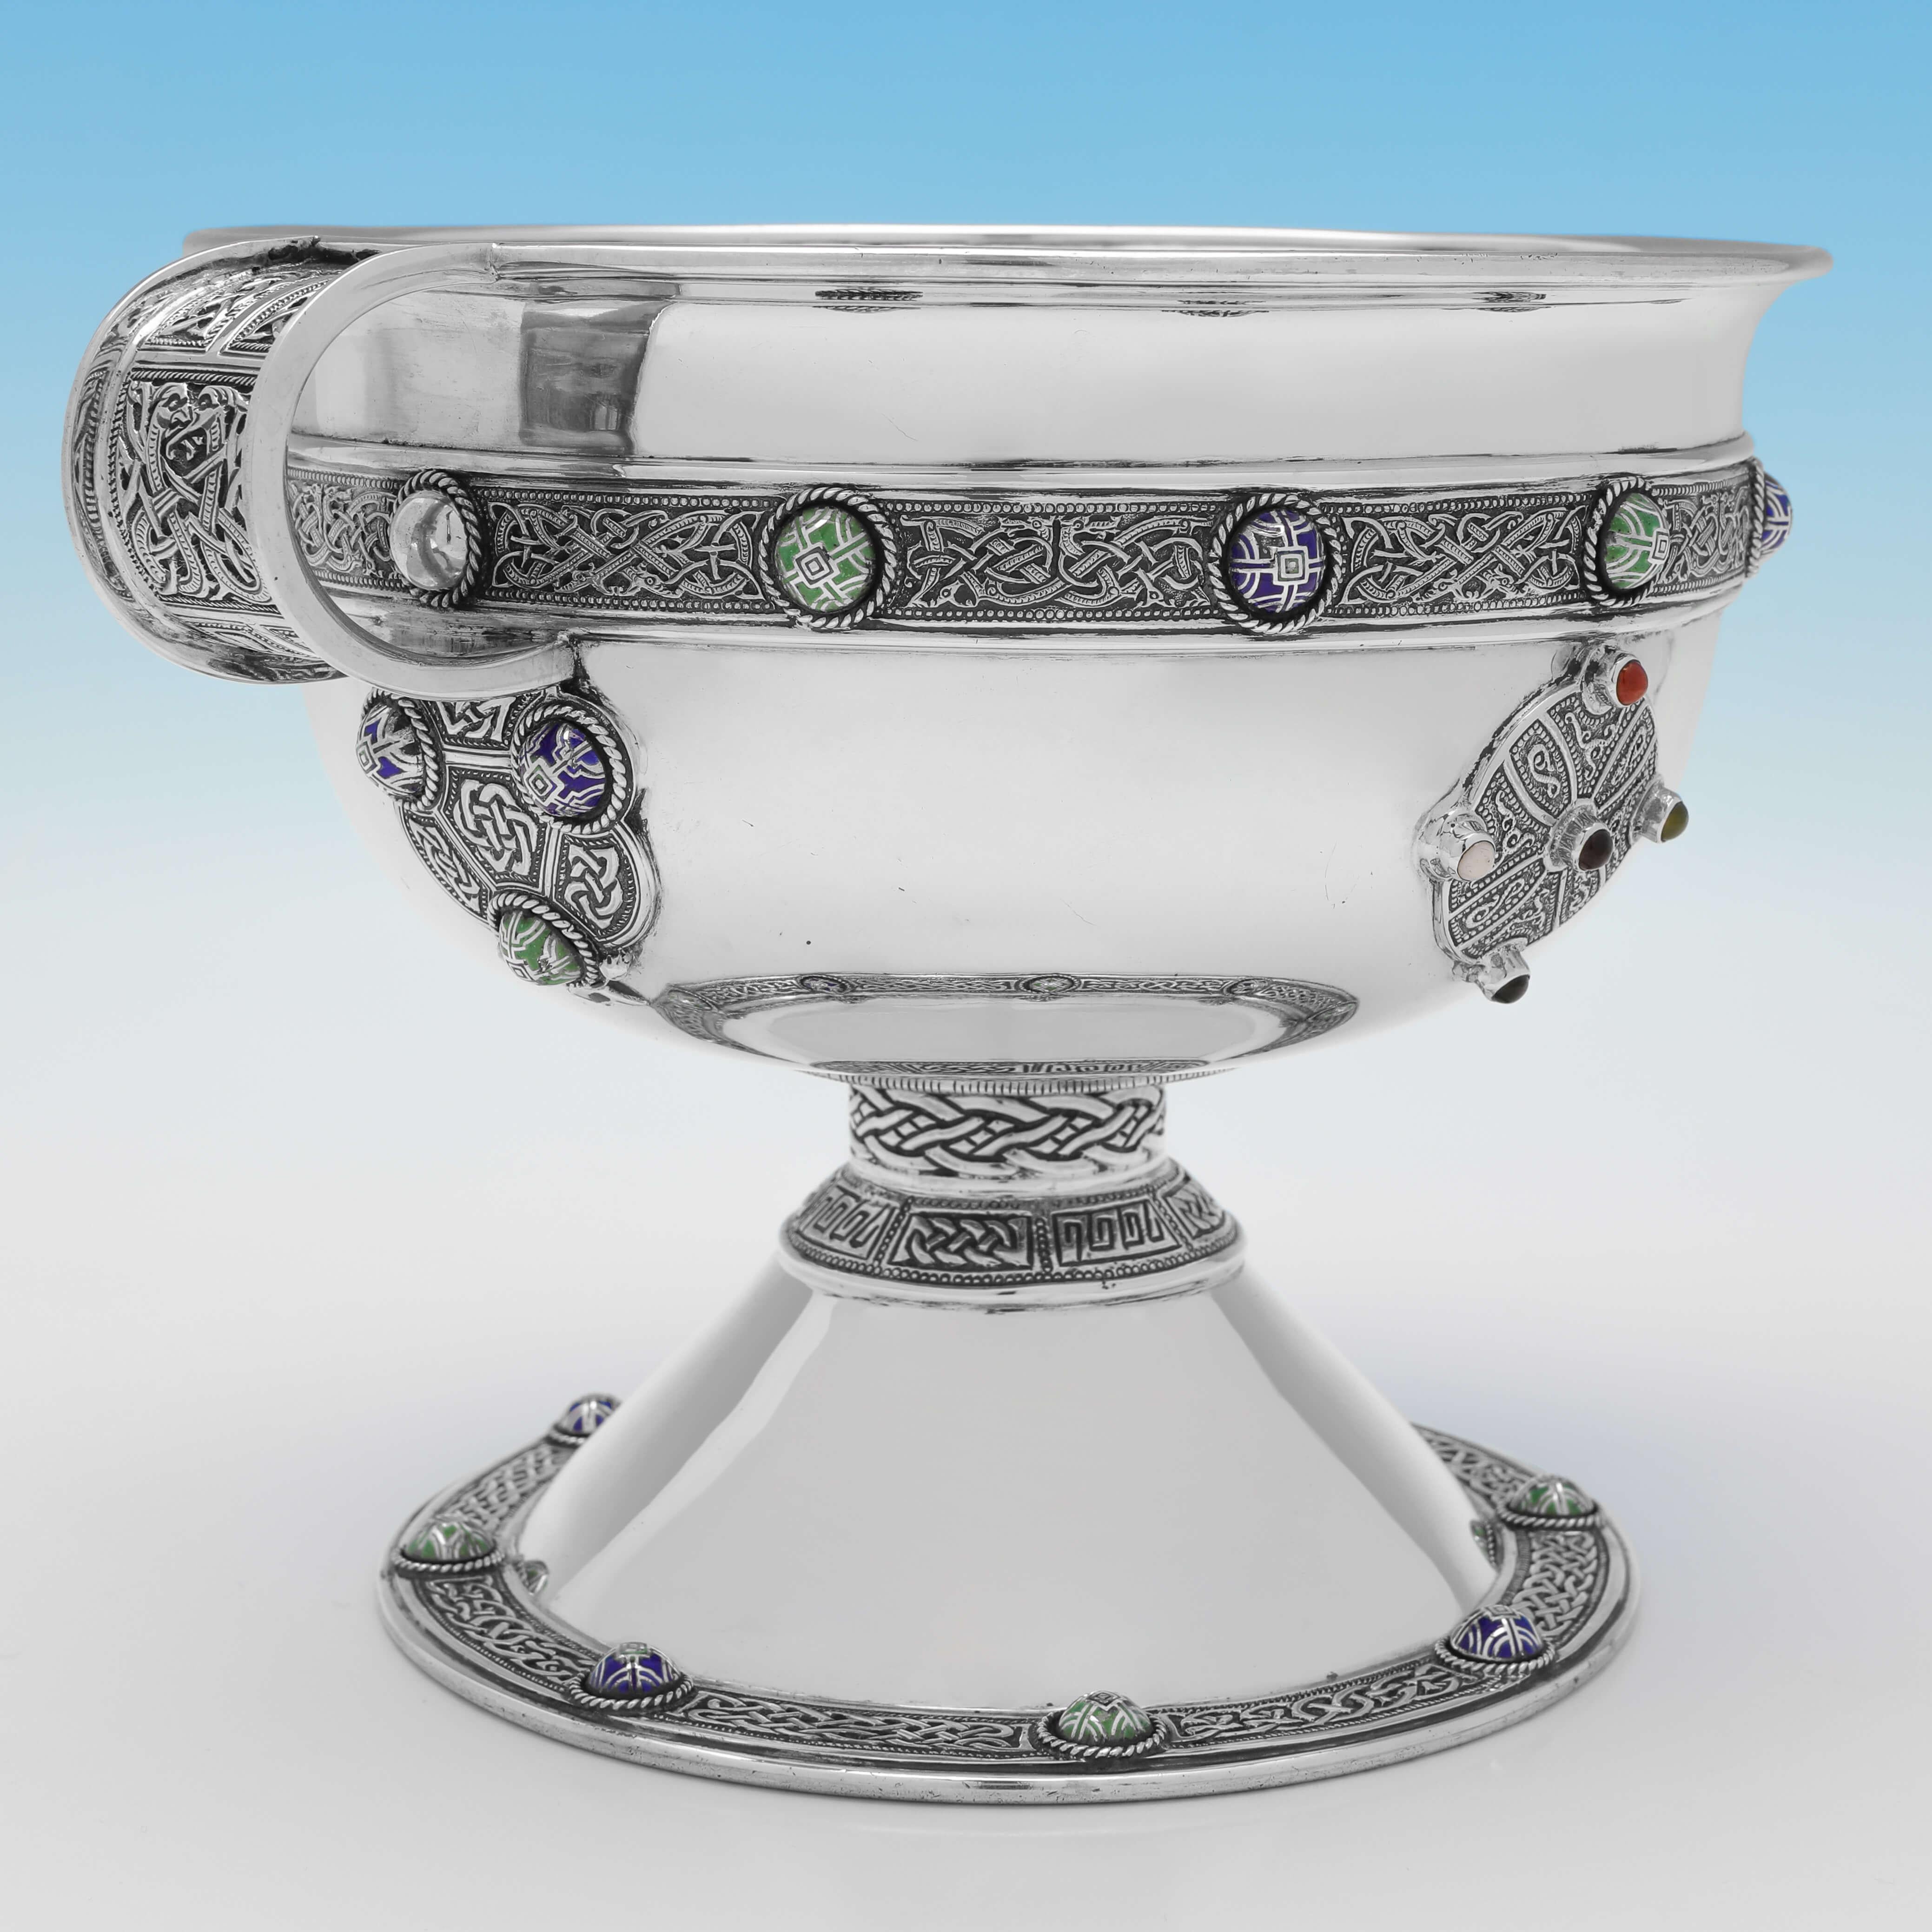 The Ardagh Chalice is considered to be one of the greatest treasures of the early Irish Church, and one of the finest known works of Insular art. It is thought to have been made in the 8th Century AD, and was discovered in 1868 by Jim Quin & Paddy